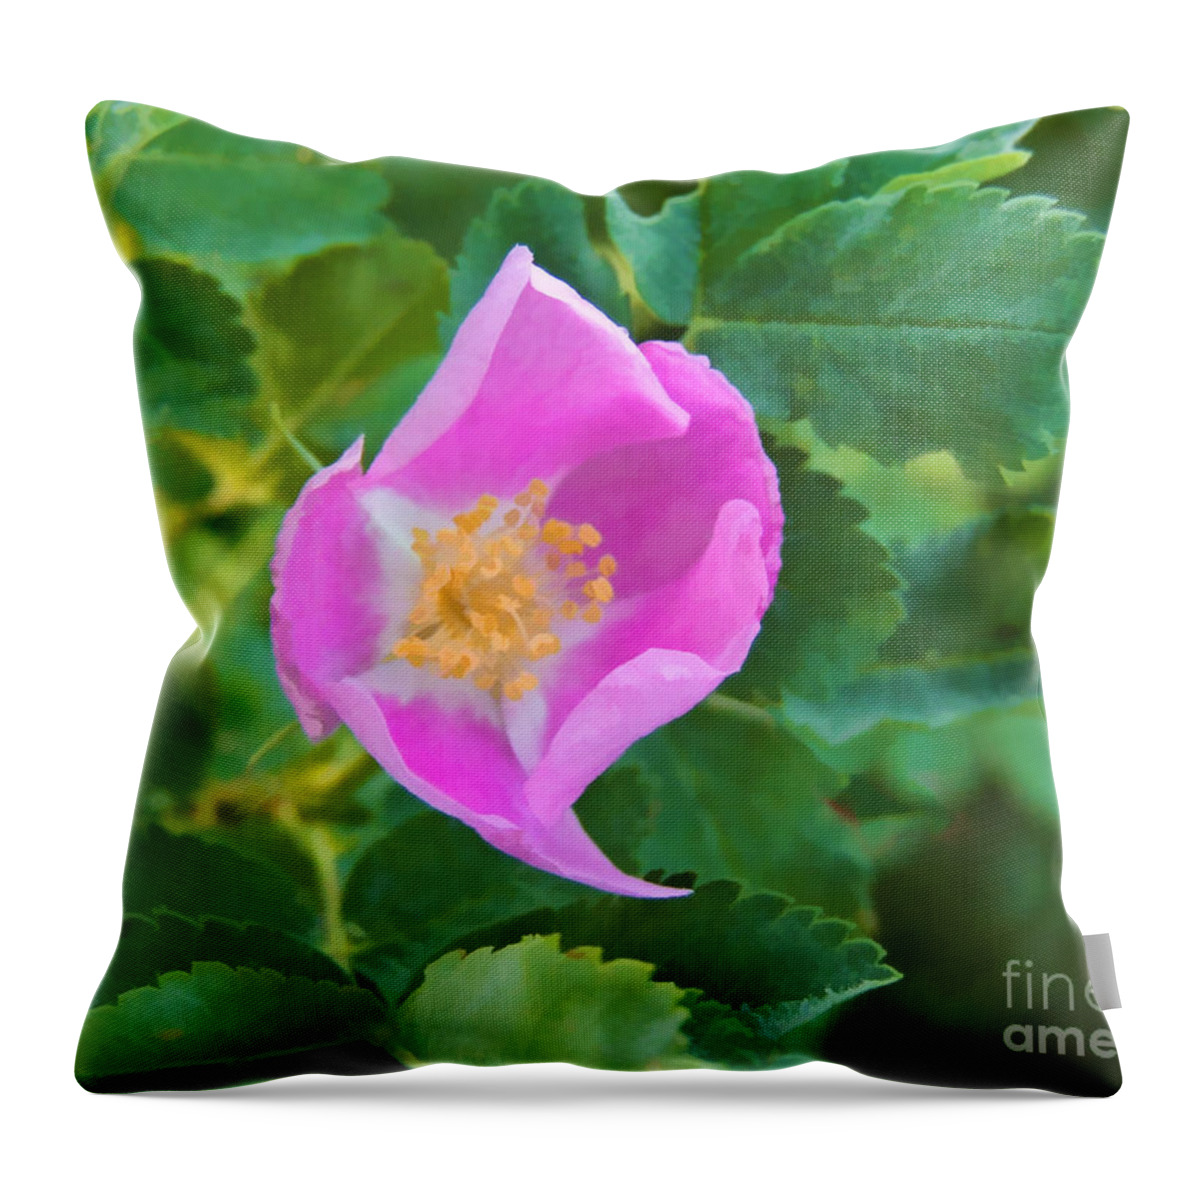 Rose Throw Pillow featuring the digital art Wild Rose by L J Oakes